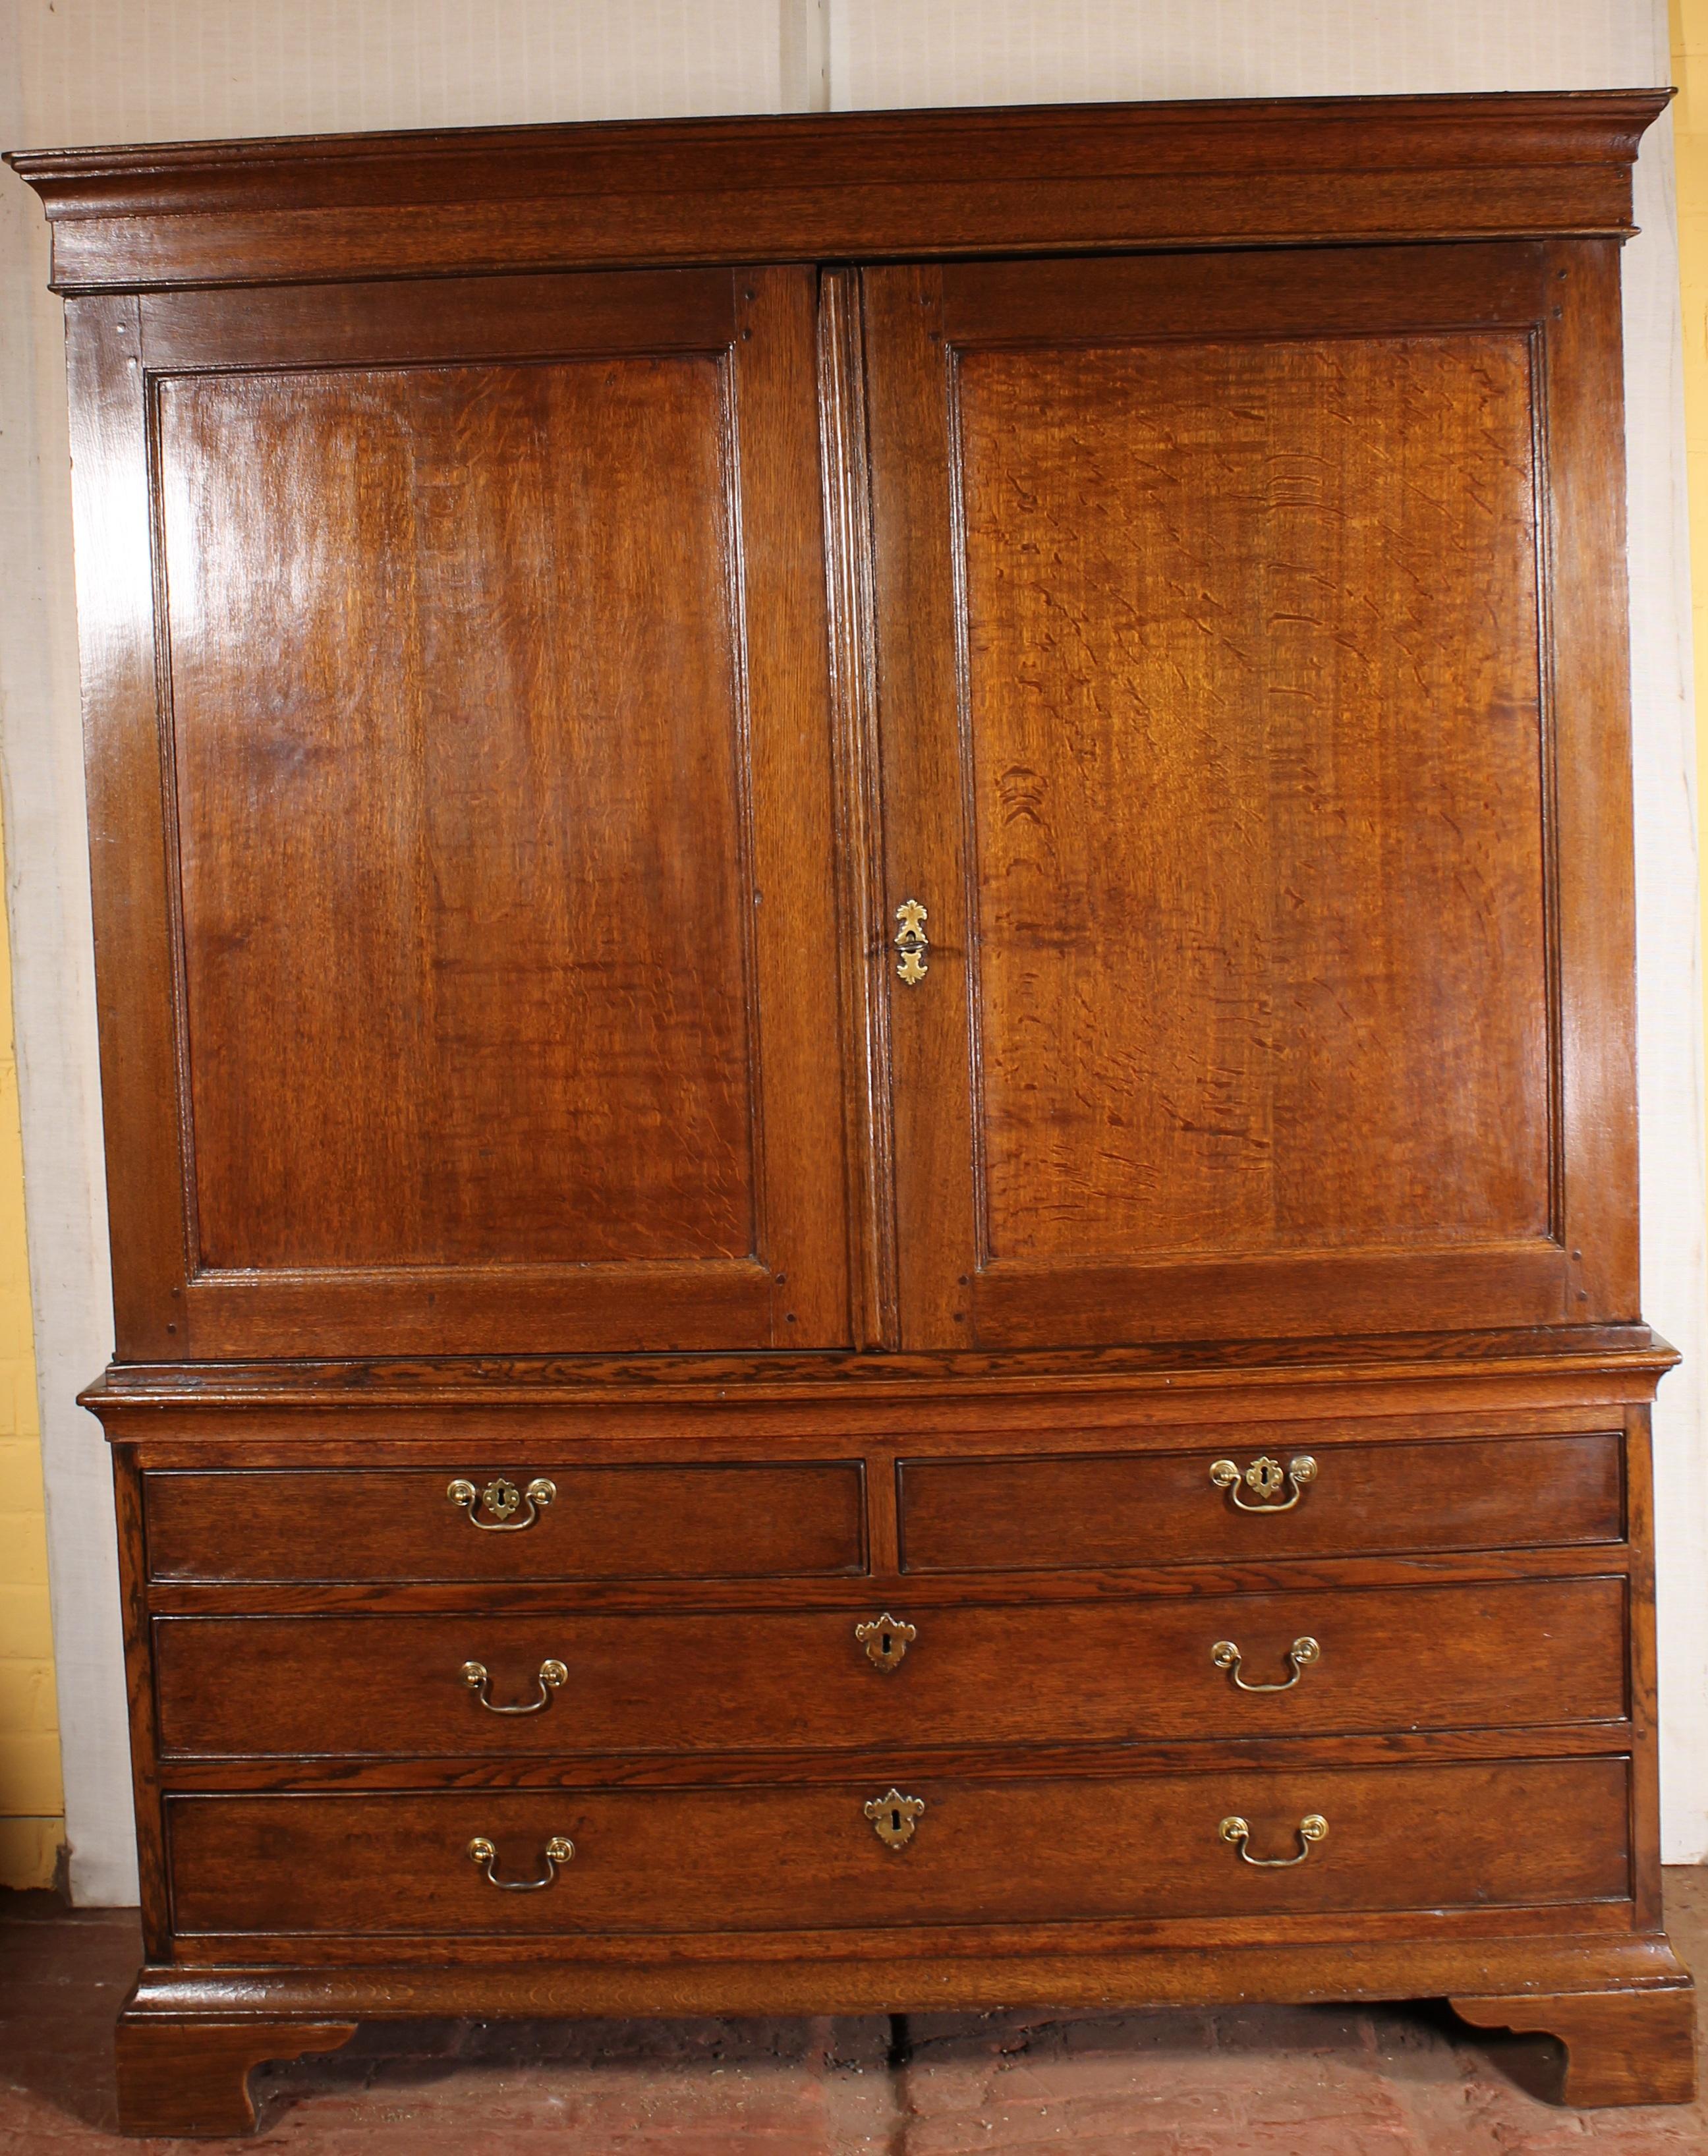 Beautiful oak linen press starting 18th century, circa 1700.
Very beautiful piece with a lot of character. Original brass and corniche. 

We can feel a Dutch influence in this piece. This piece was probably made by a Flemish cabinetmaker that